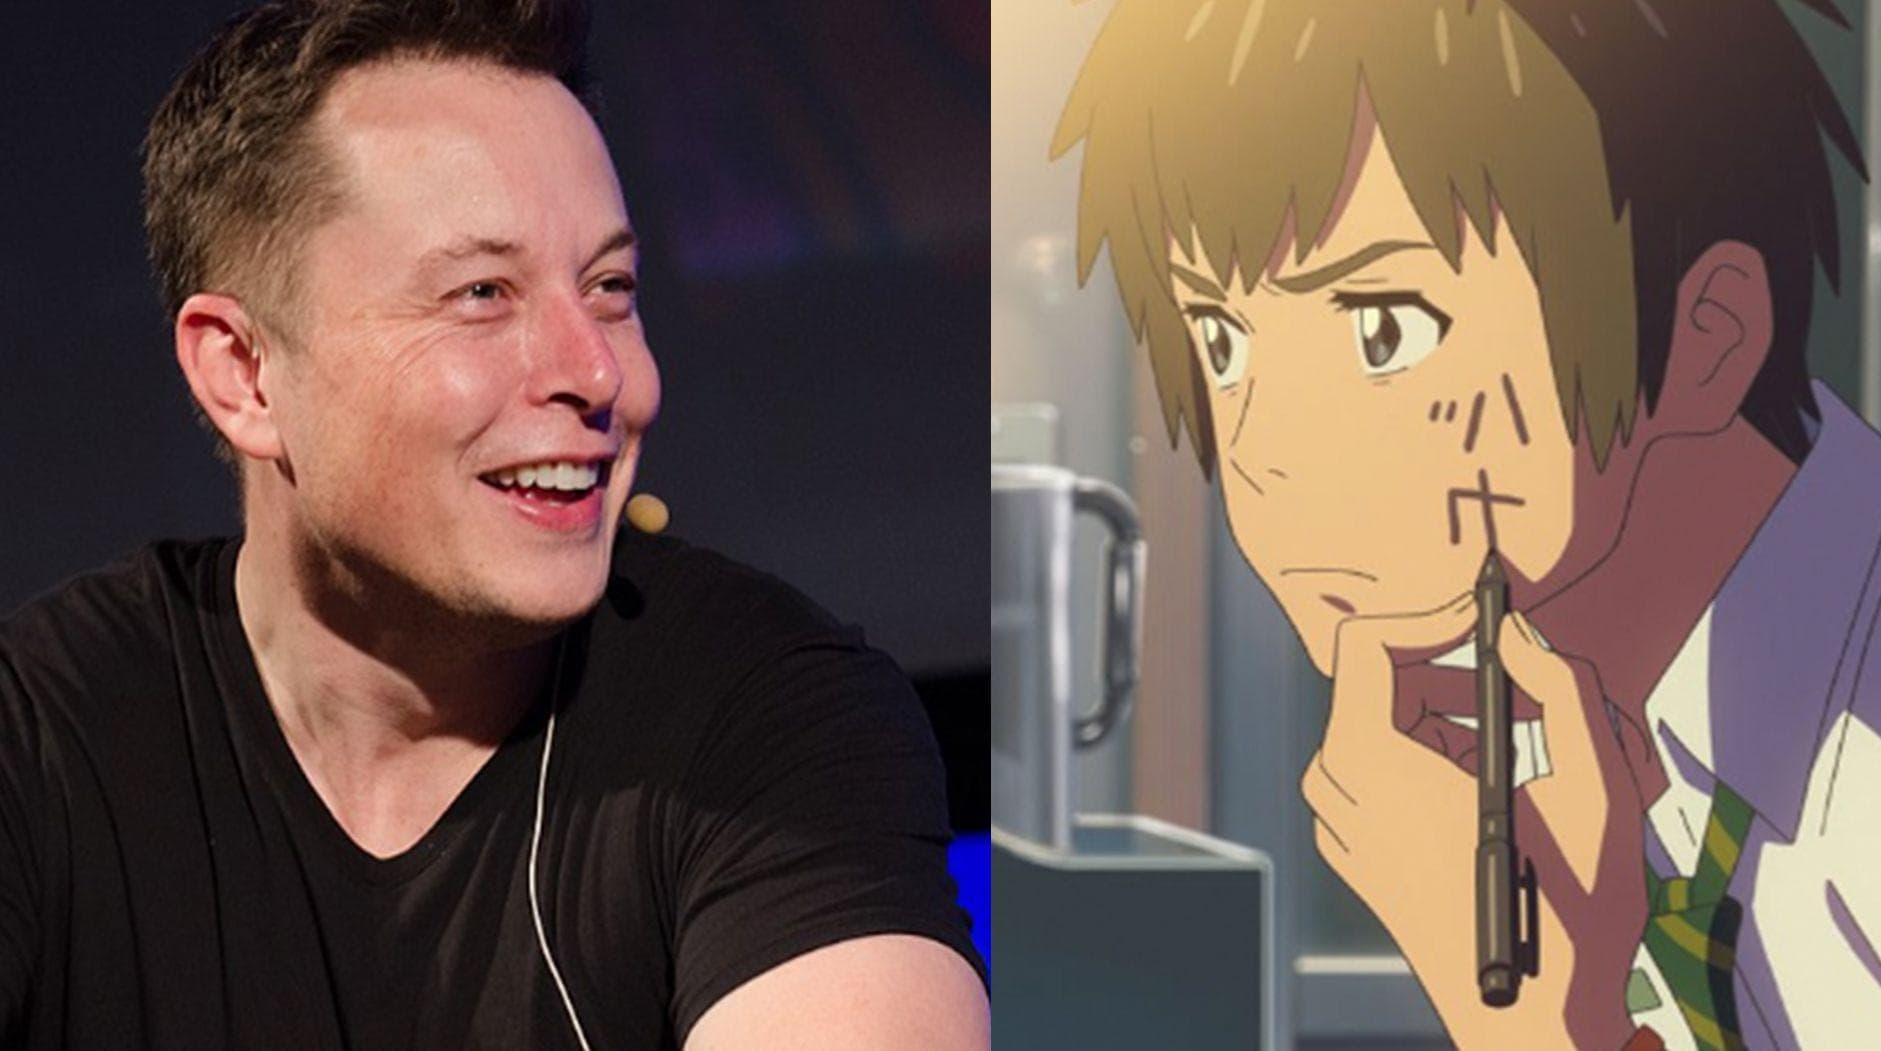 Elon Musk mentions his favorite anime shows and movies